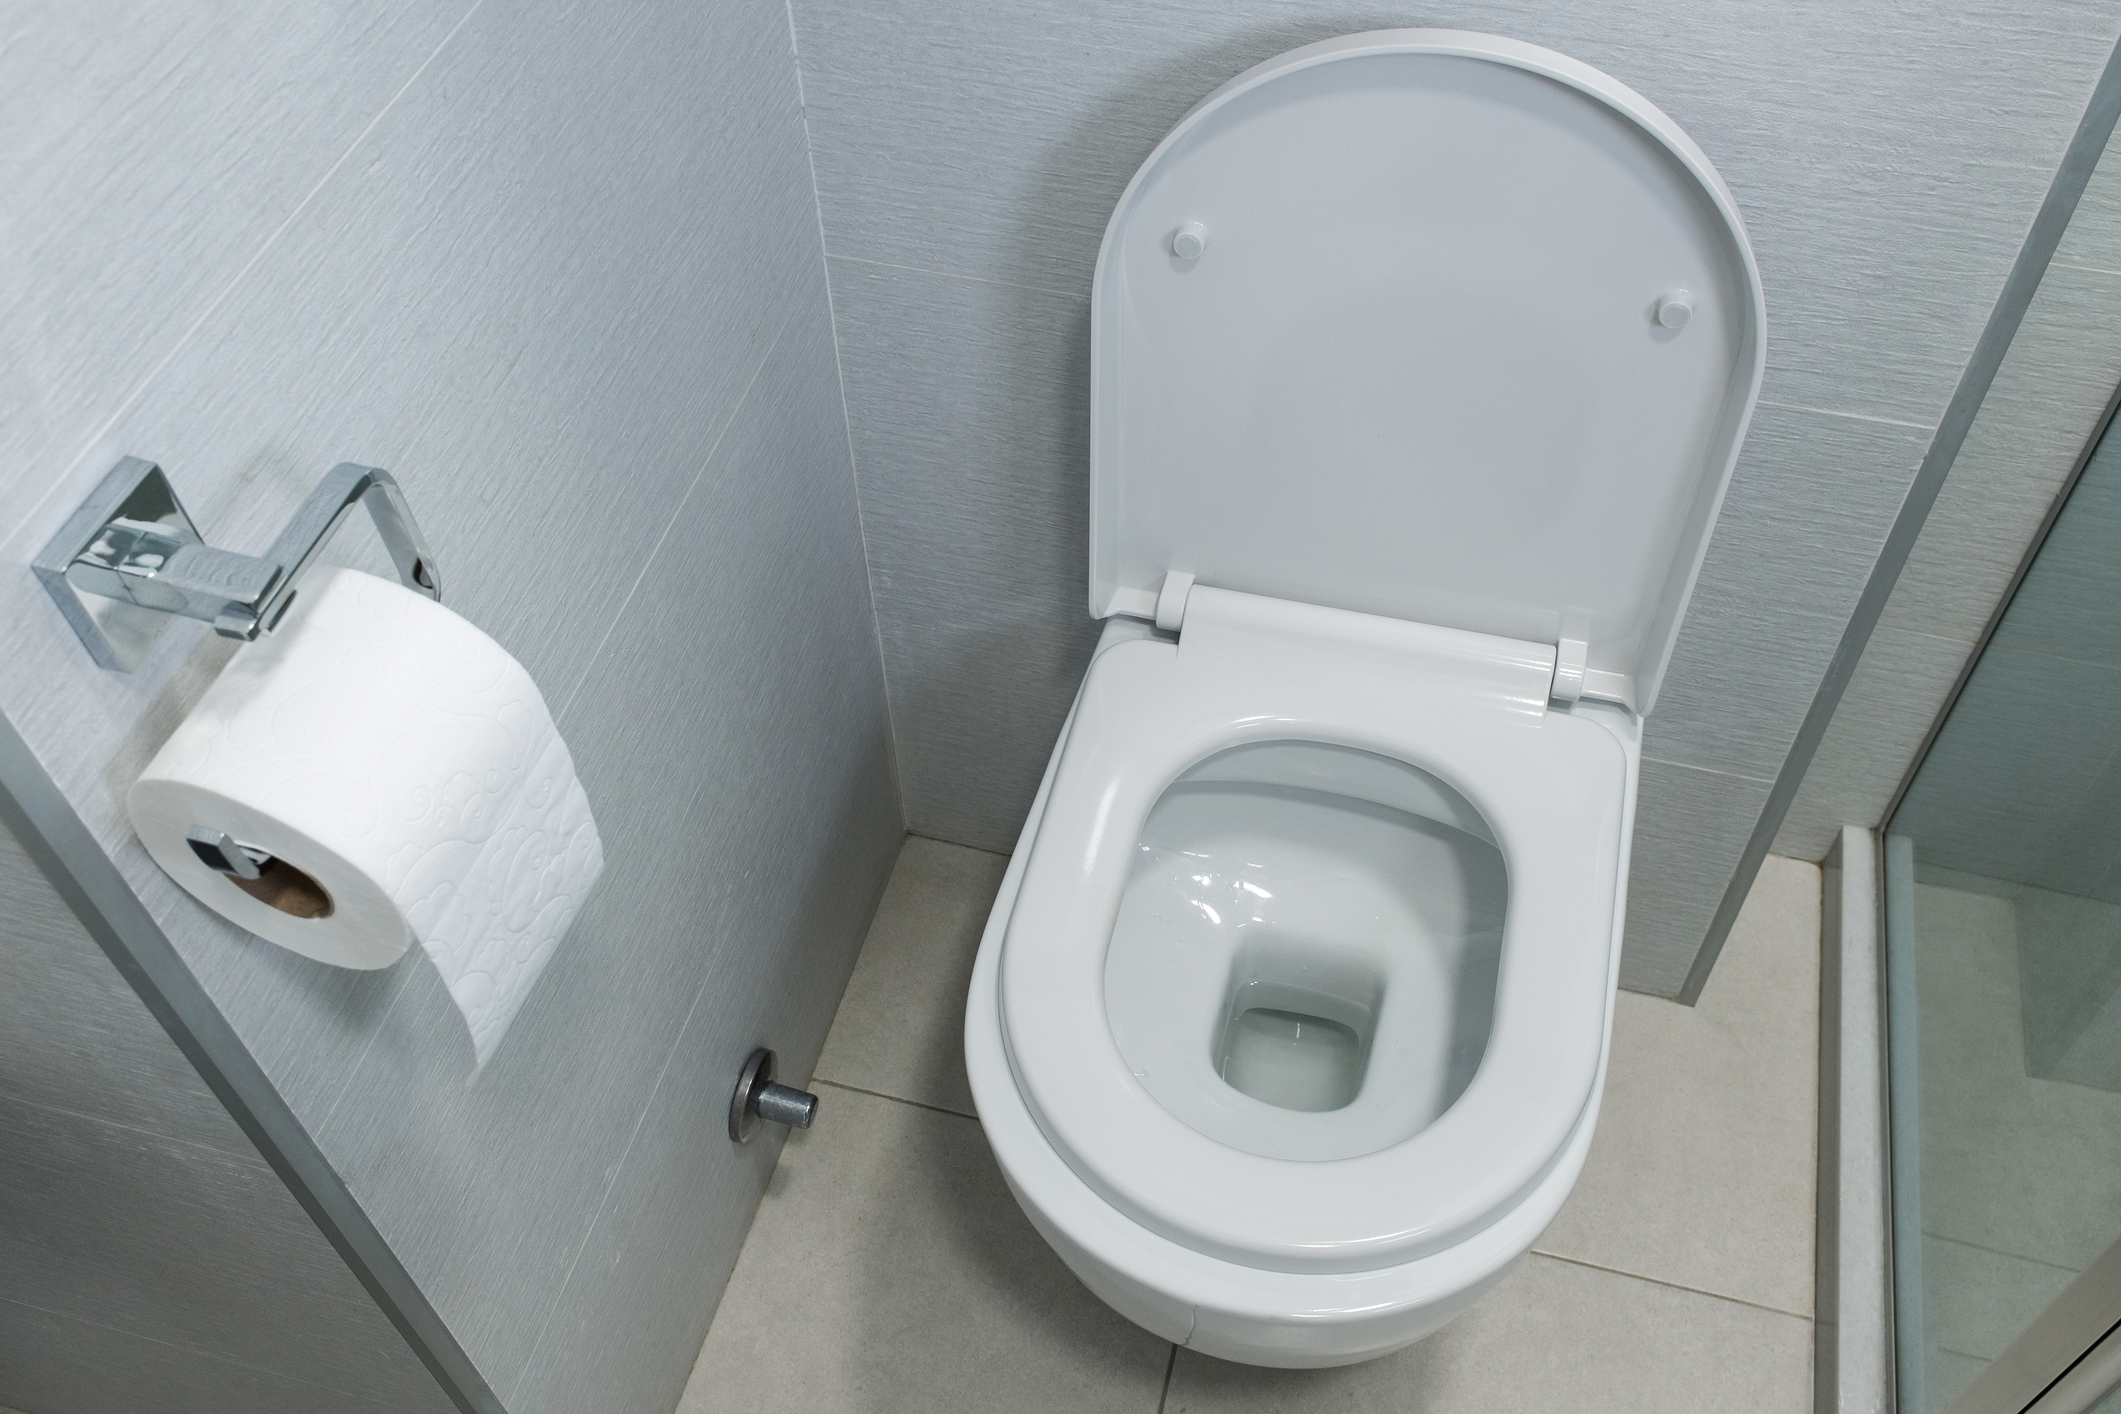 White toilet next to a wall-mounted toilet paper holder in a small bathroom